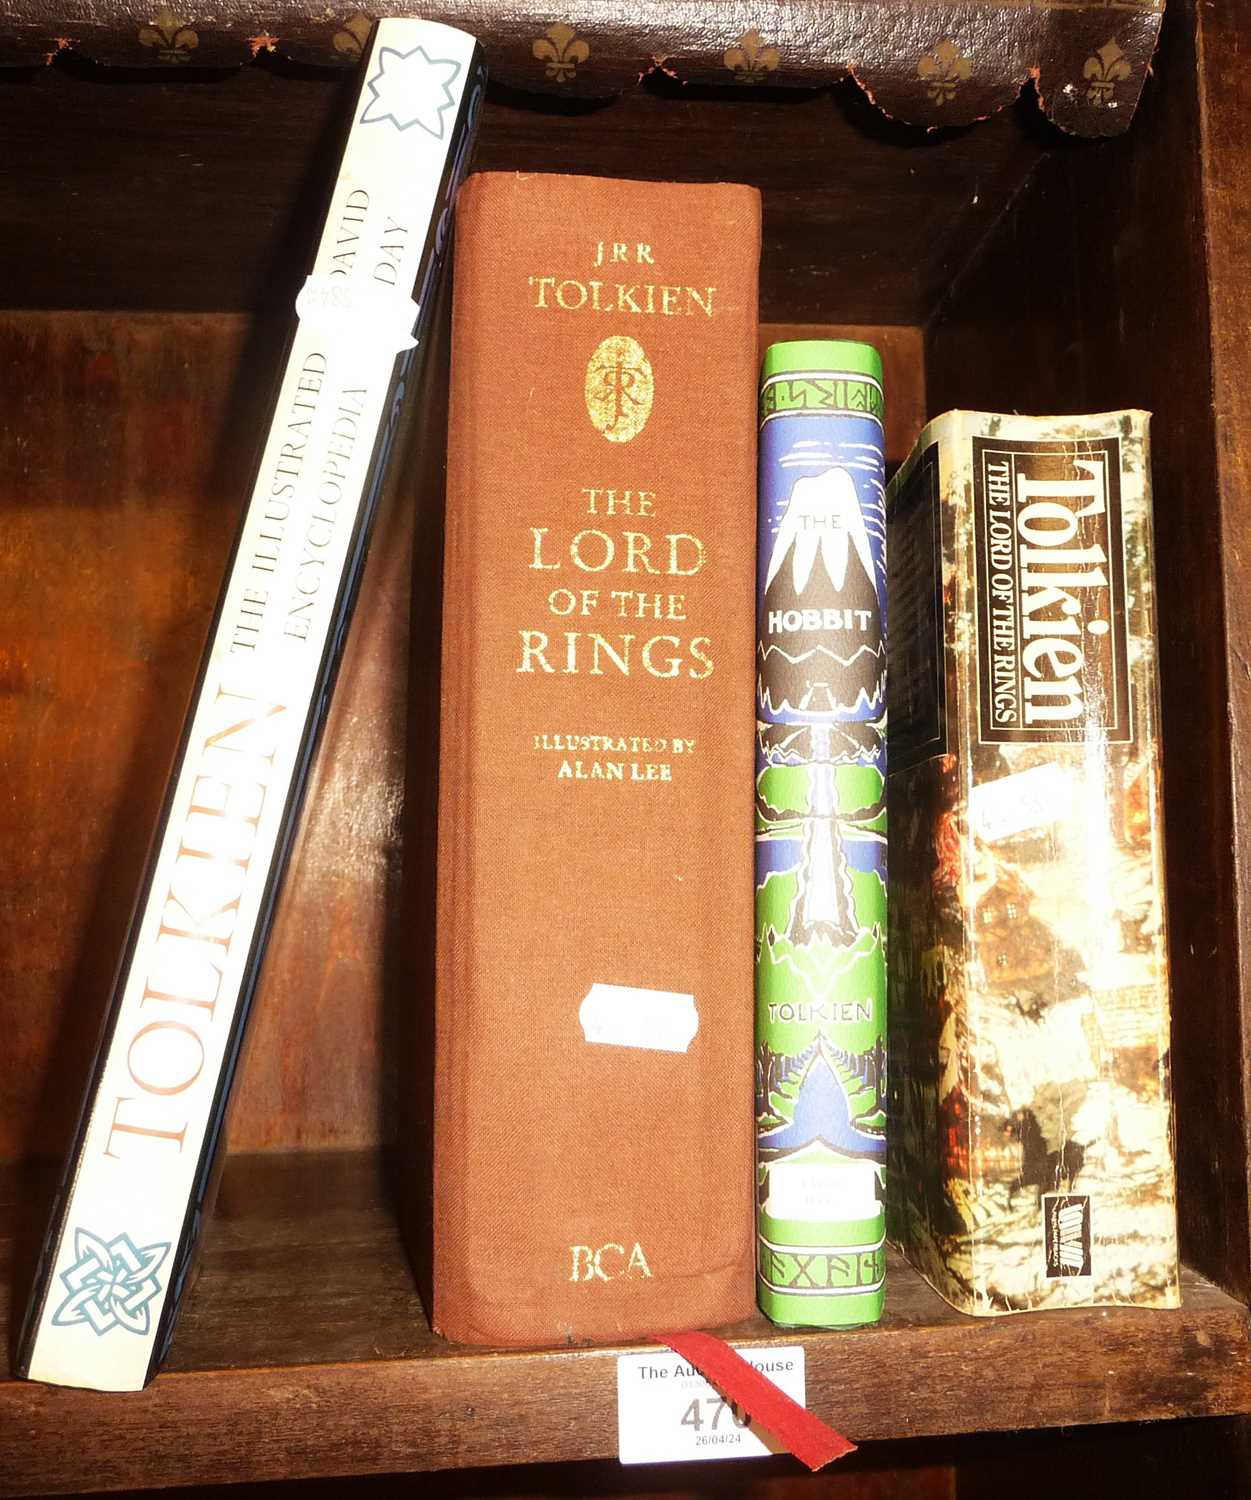 J.R.R. Tolkien books, Lord of the Rings, HB 1991, The Hobbit (modern), and two other books